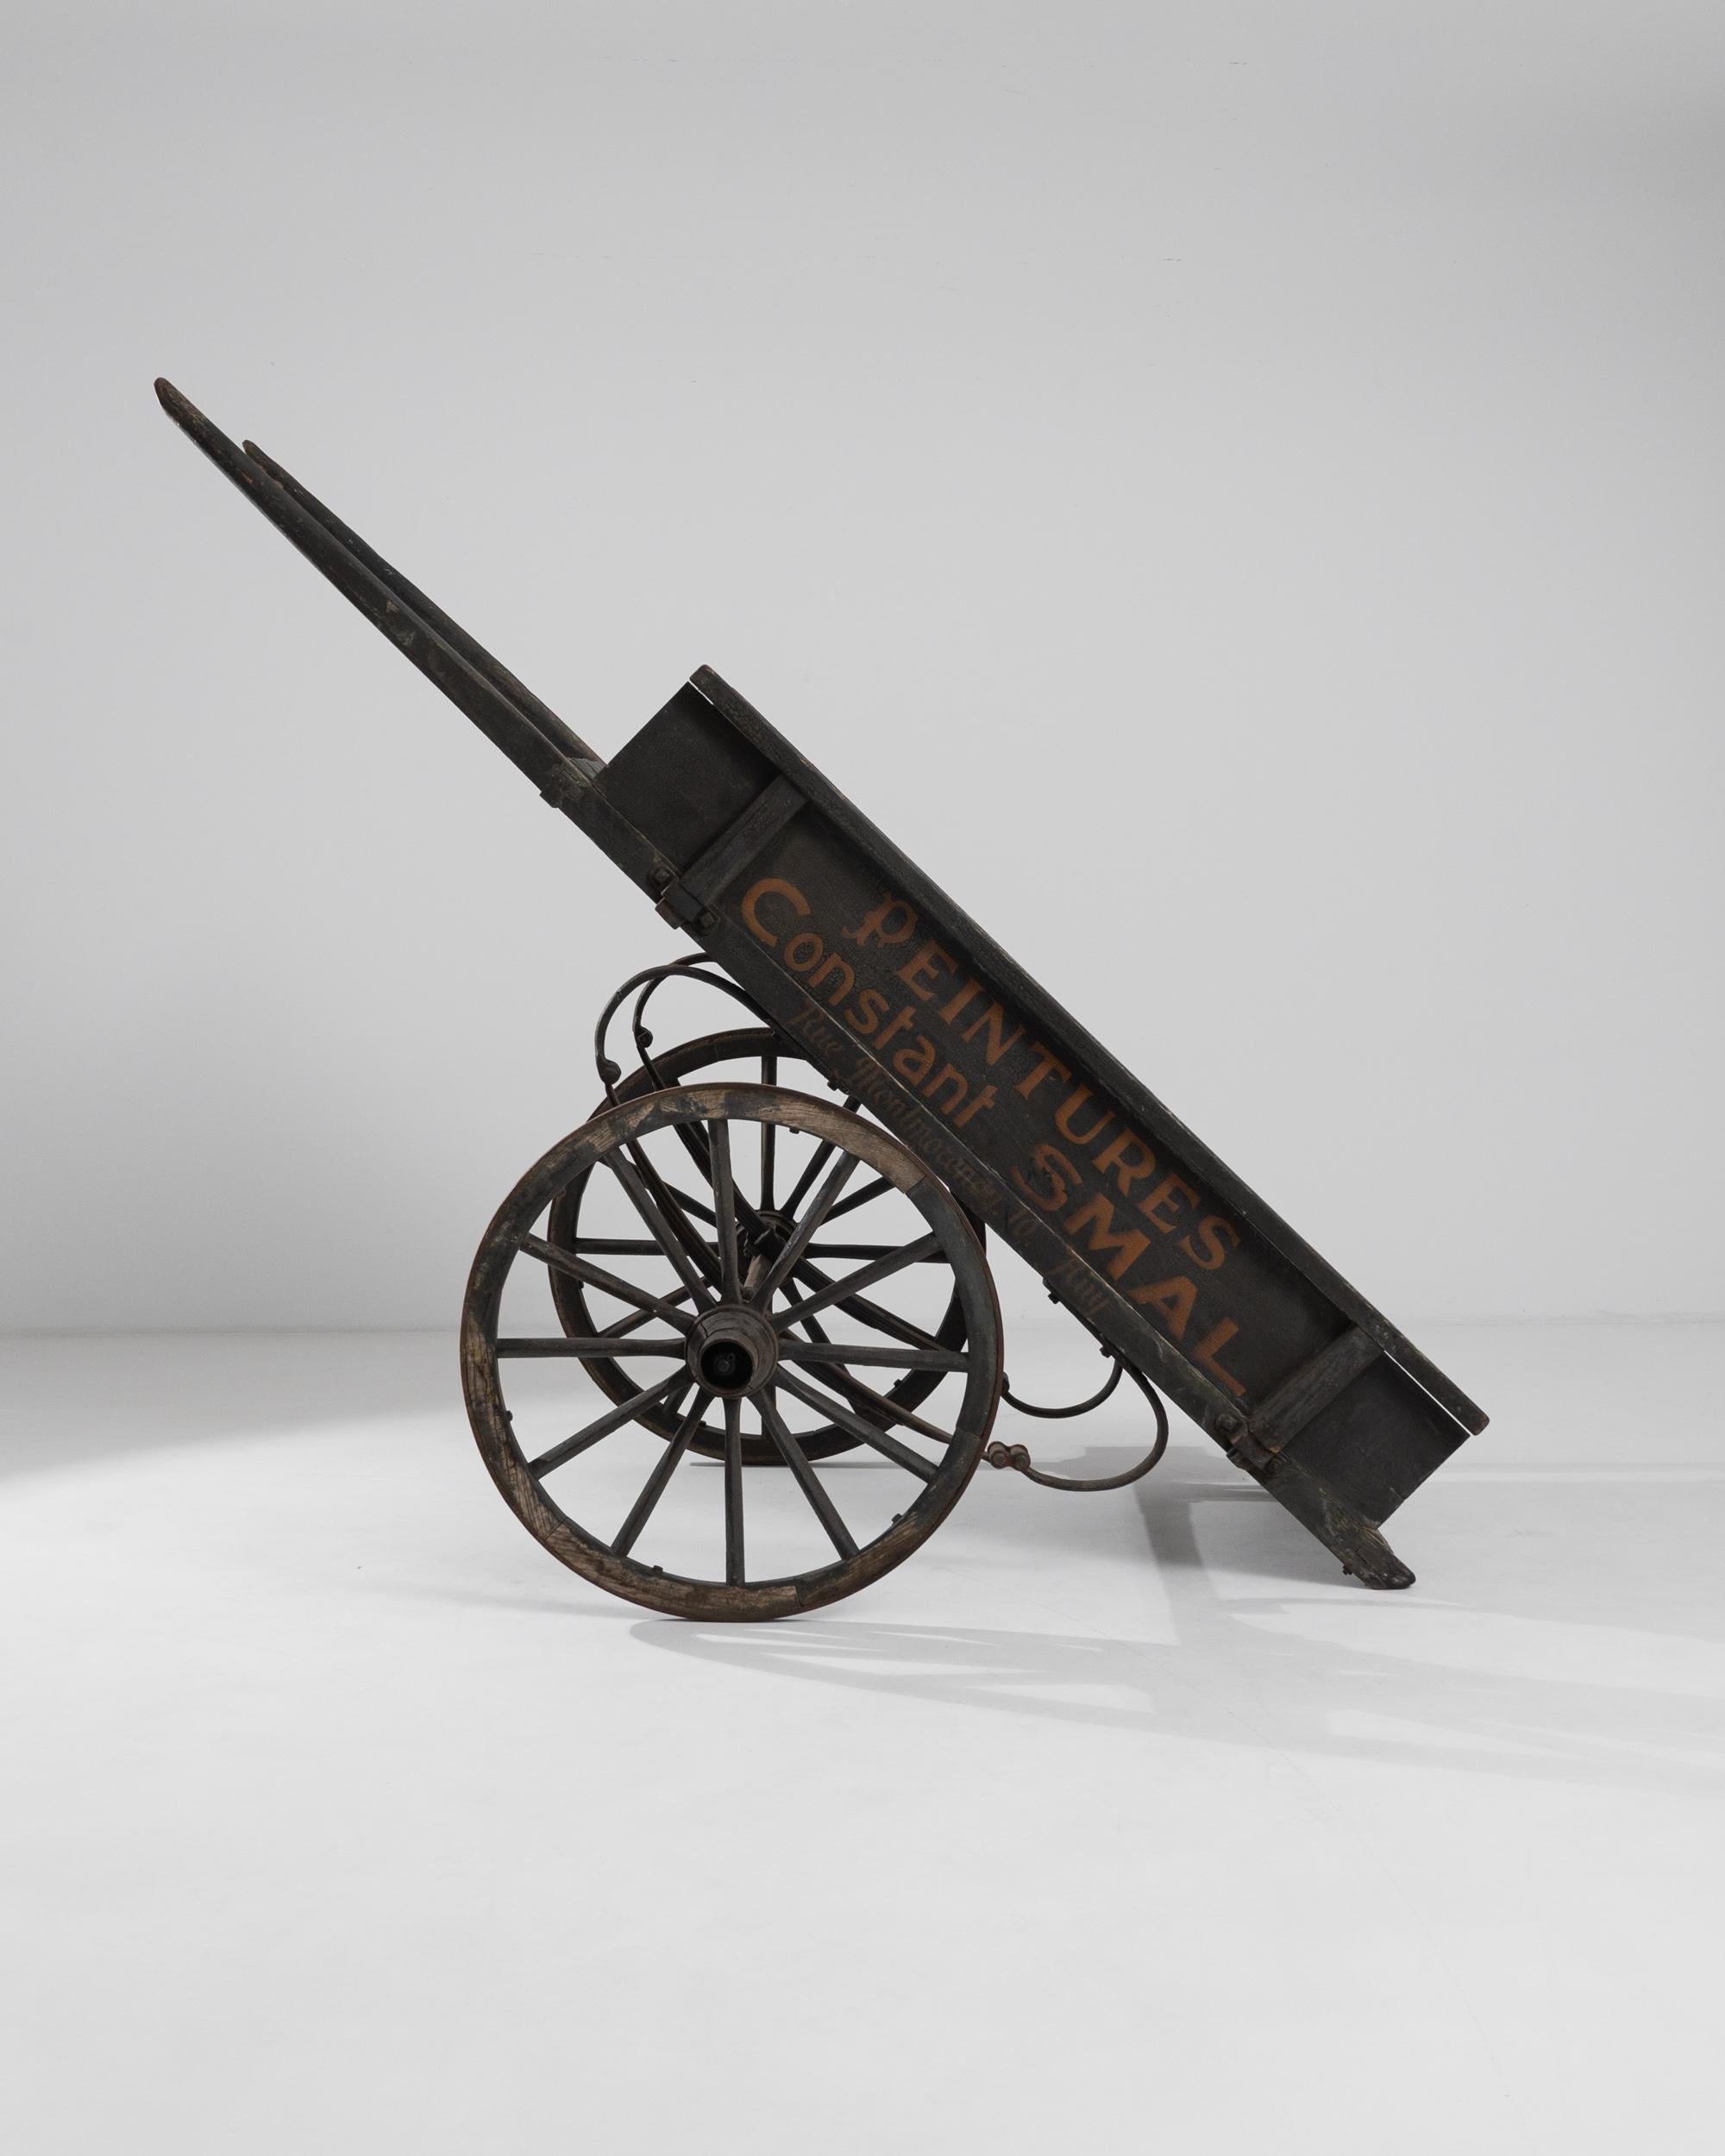 This antique wooden carriage was produced in 1900 in Belgium. A large carriage painted in black, displaying the inscription “Peintures Constant Smal” in dark red lettering. Standing firm on sturdy wheels, the wooden cart conjures the daily routine